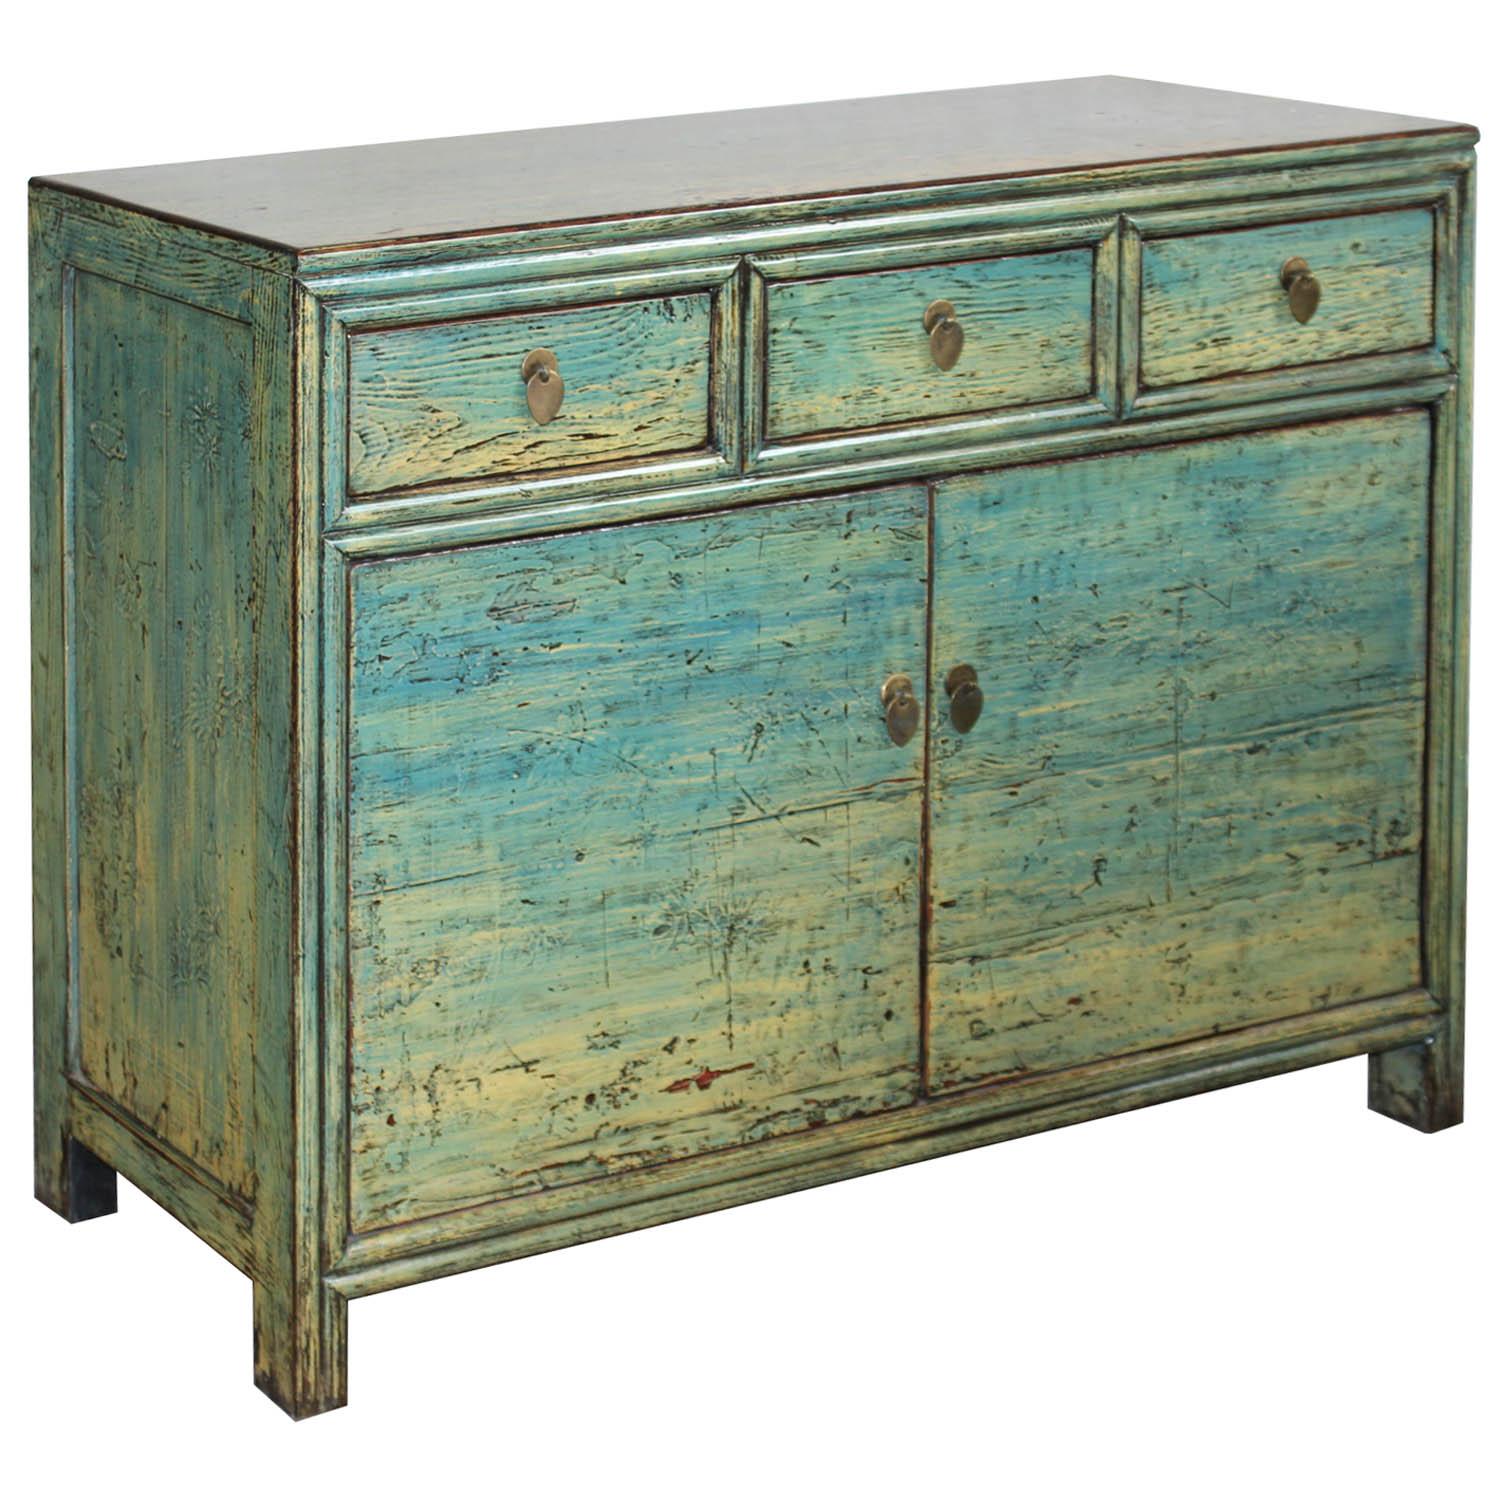 Contemporary hand-painted buffet with blue or green lacquer finish and exposed wood edges. Use in the living, dining room or entry way.